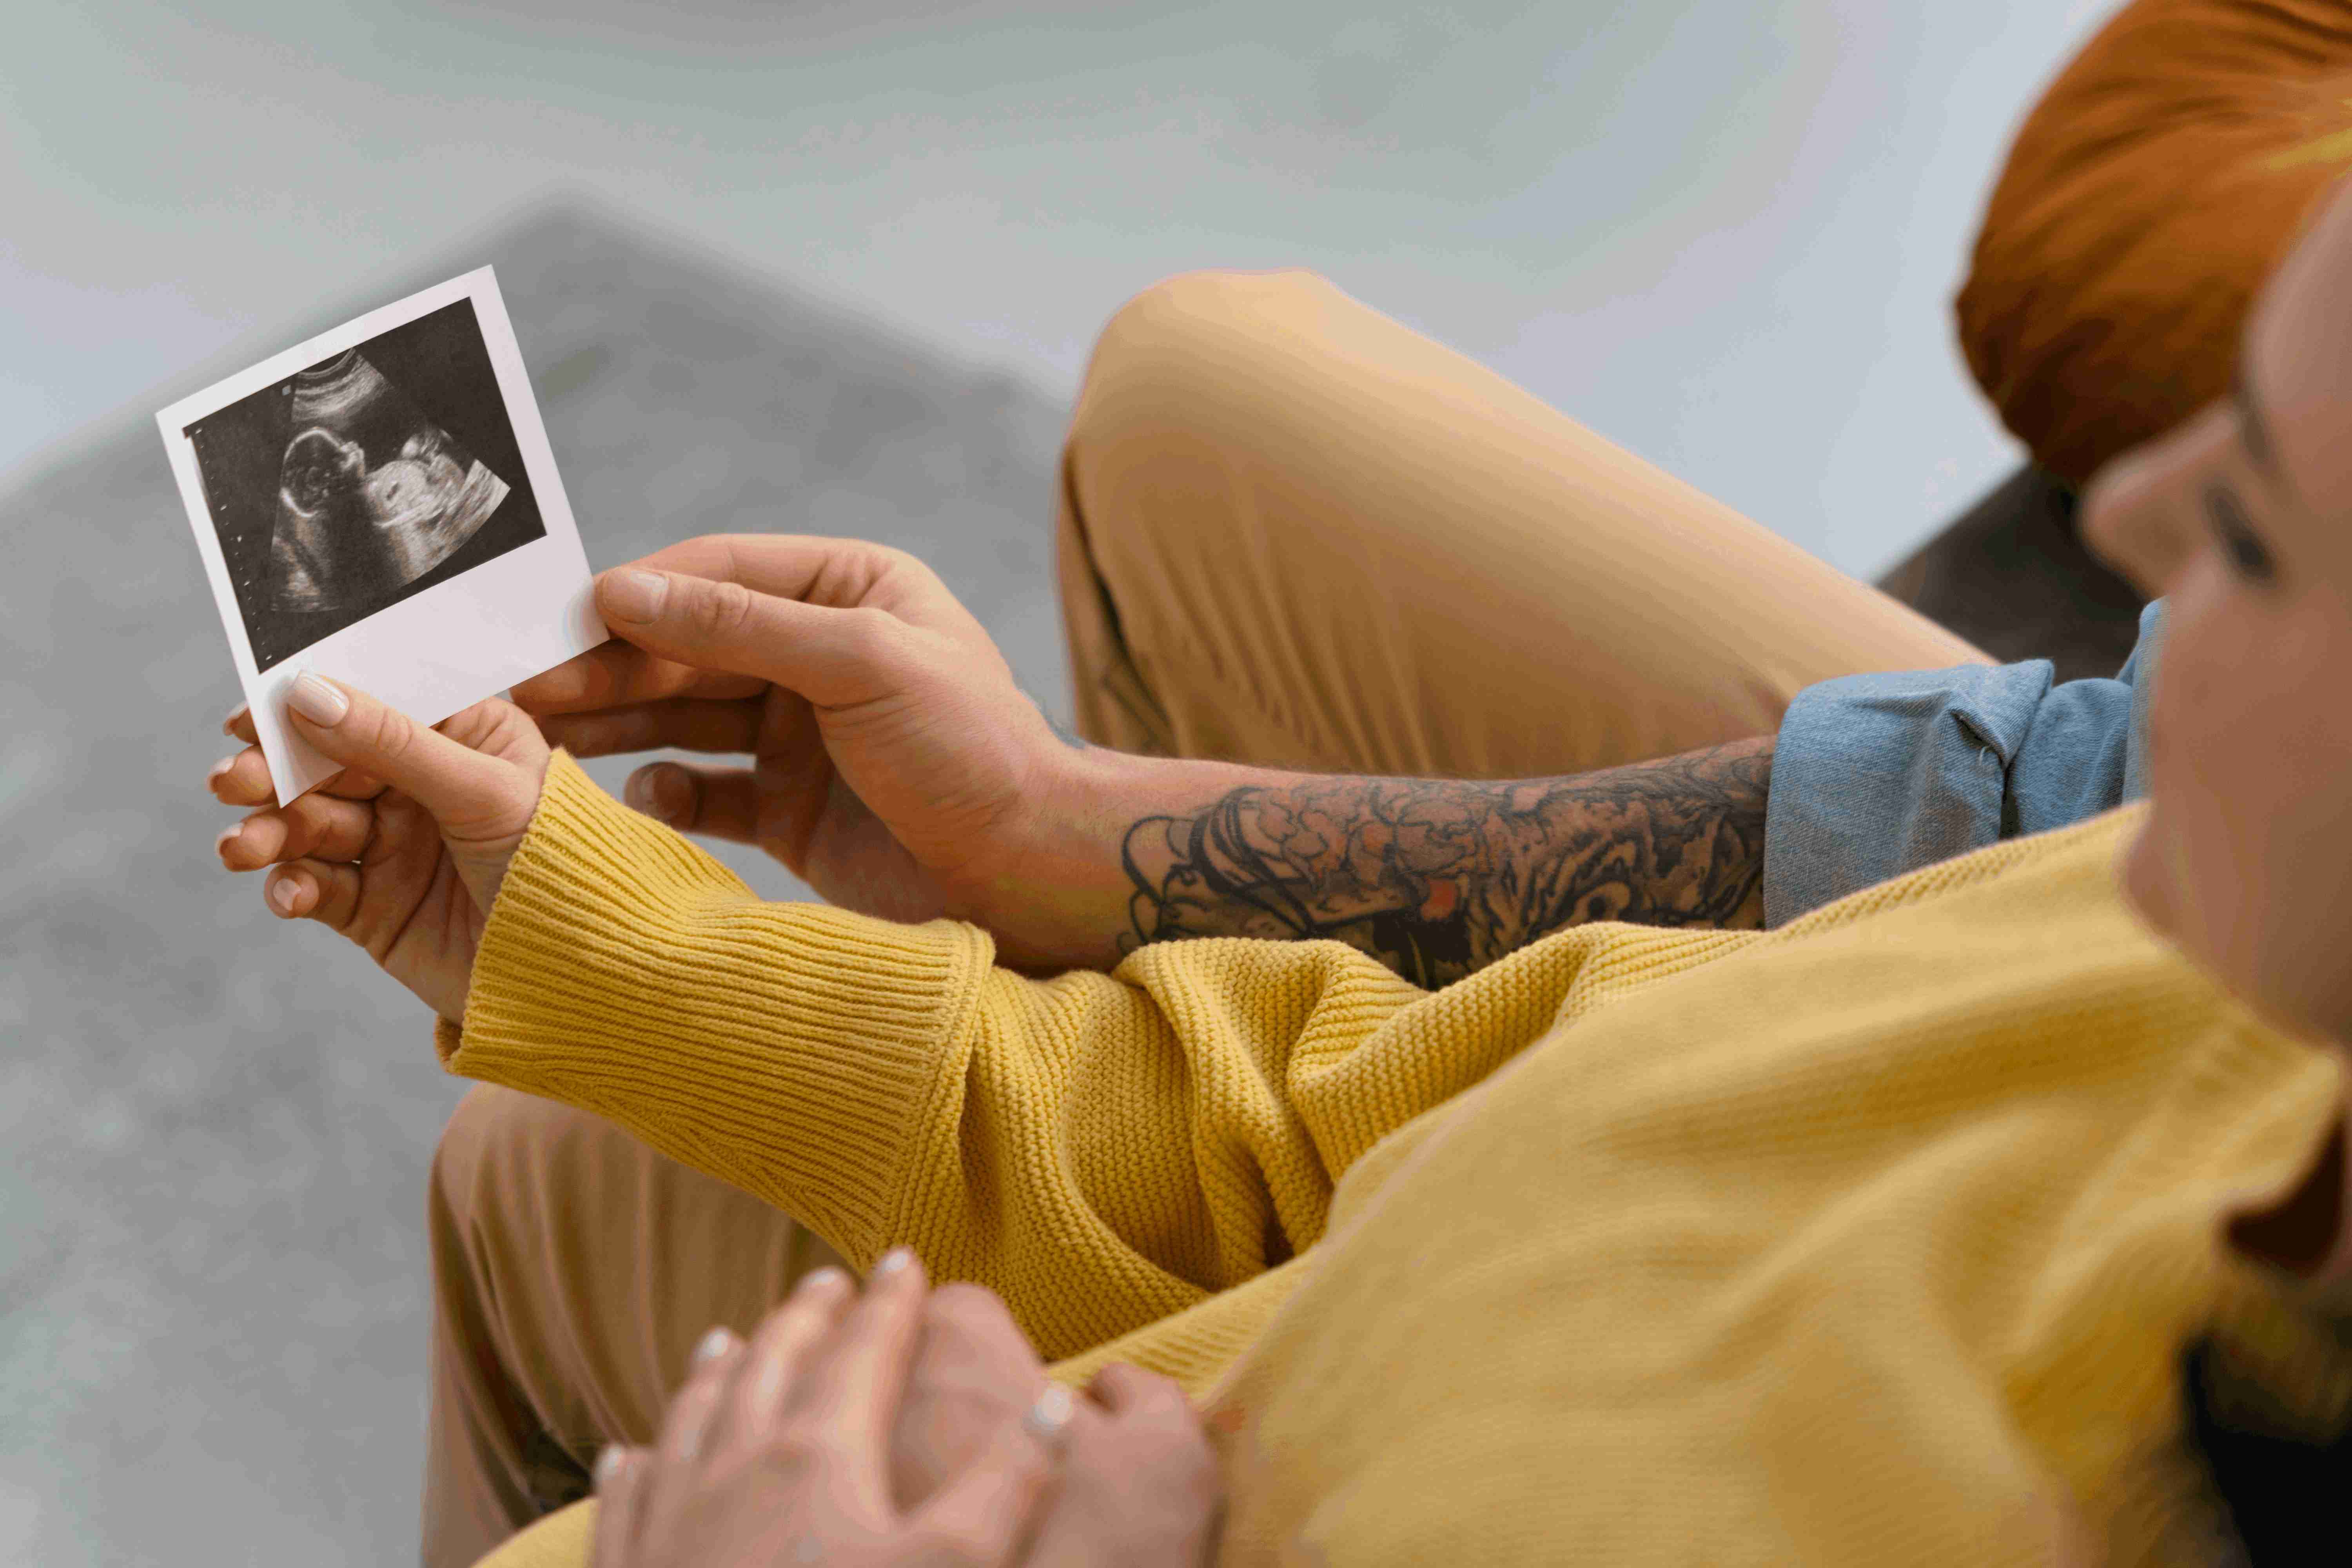 We offer professional pregnancy scanning from our Private GP clinic or even from the comfort of your home! Our Stokenchurch clinic is in easy reach from High Wycombe, Marlow, Oxford and Thame, being just 1 minute off Junction 5 of the M40.